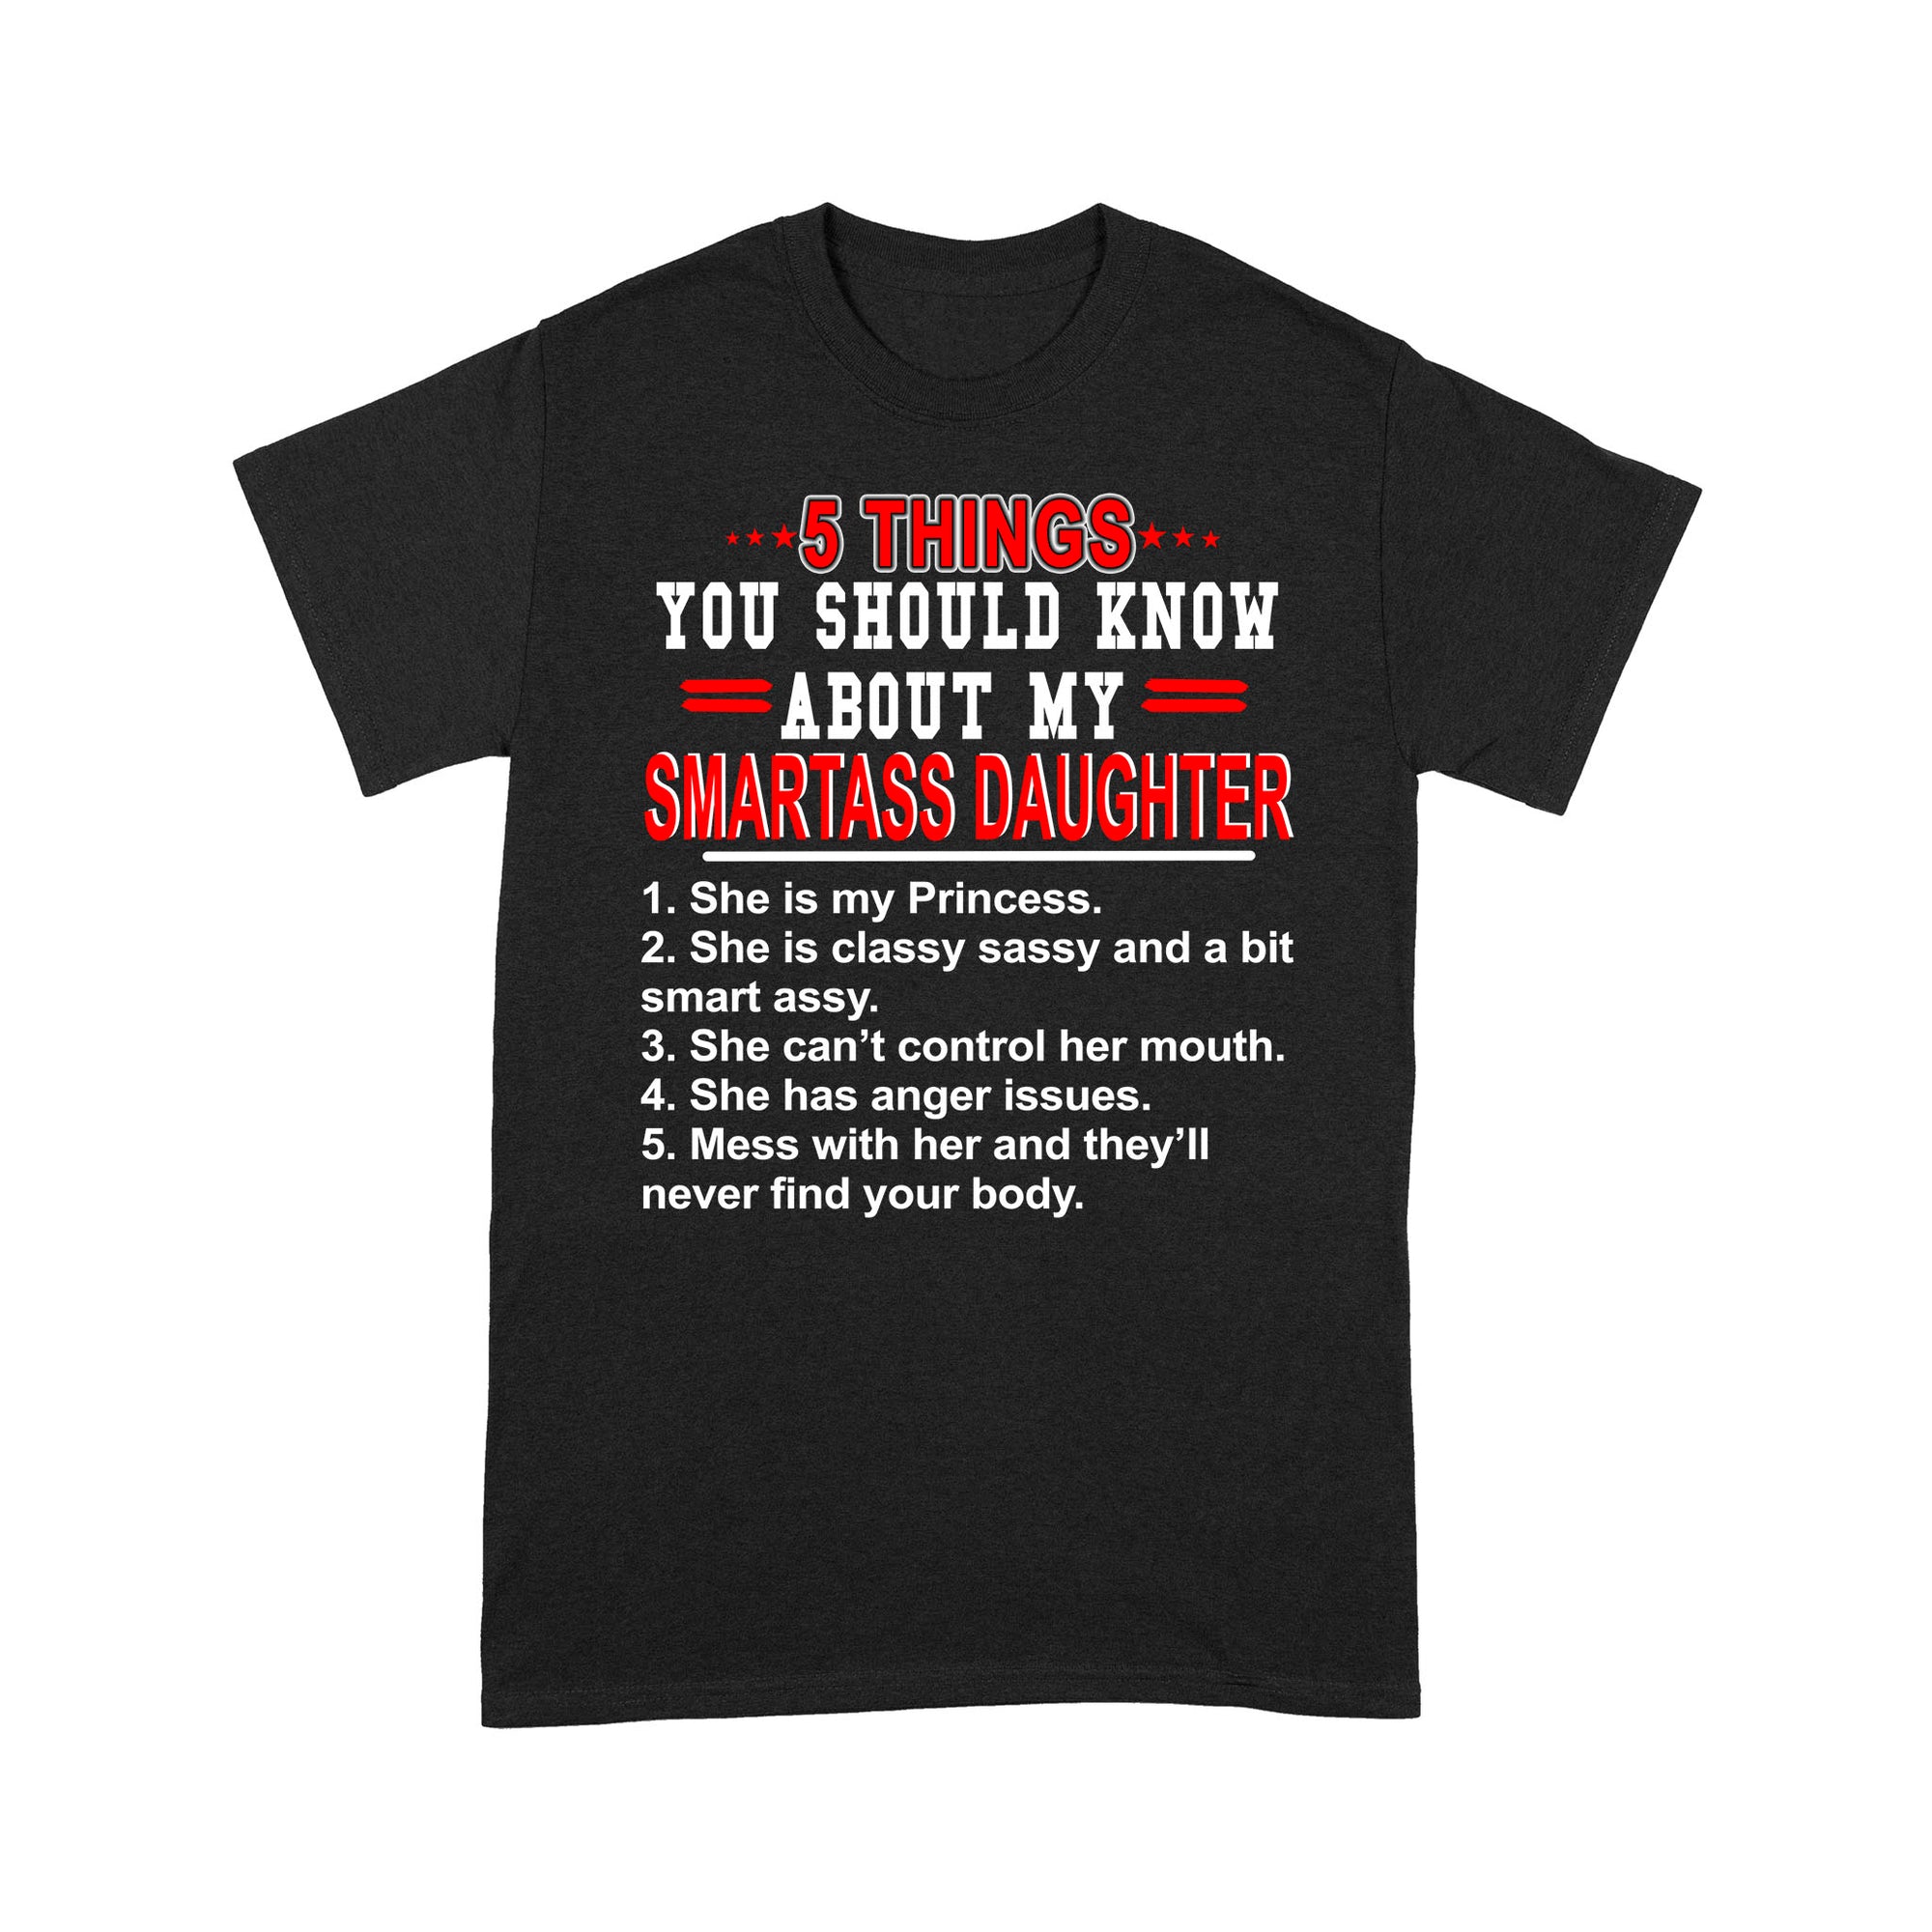 Gift Ideas for Dad 5 Things You Should Know About My Smartass Daughter (2) - Standard T-shirt